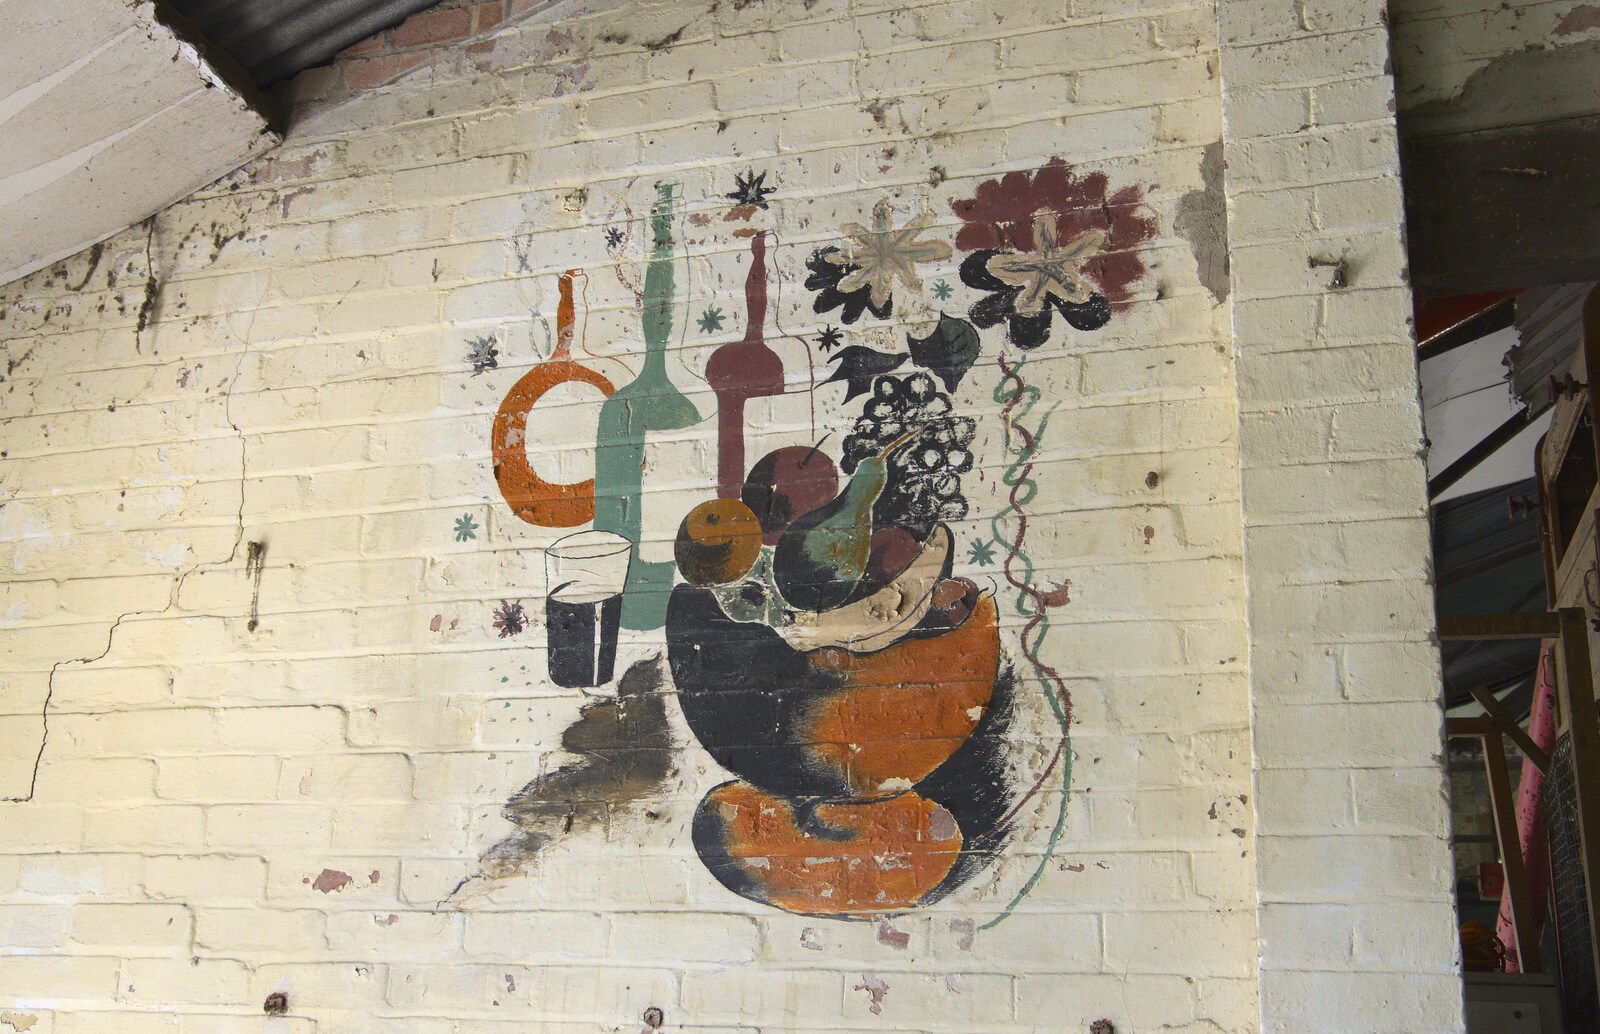 A mural of wine bottles and a fruit bowl from A 1940s Timewarp, Site 4, Bungay Airfield, Flixton, Suffolk - 9th June 2022